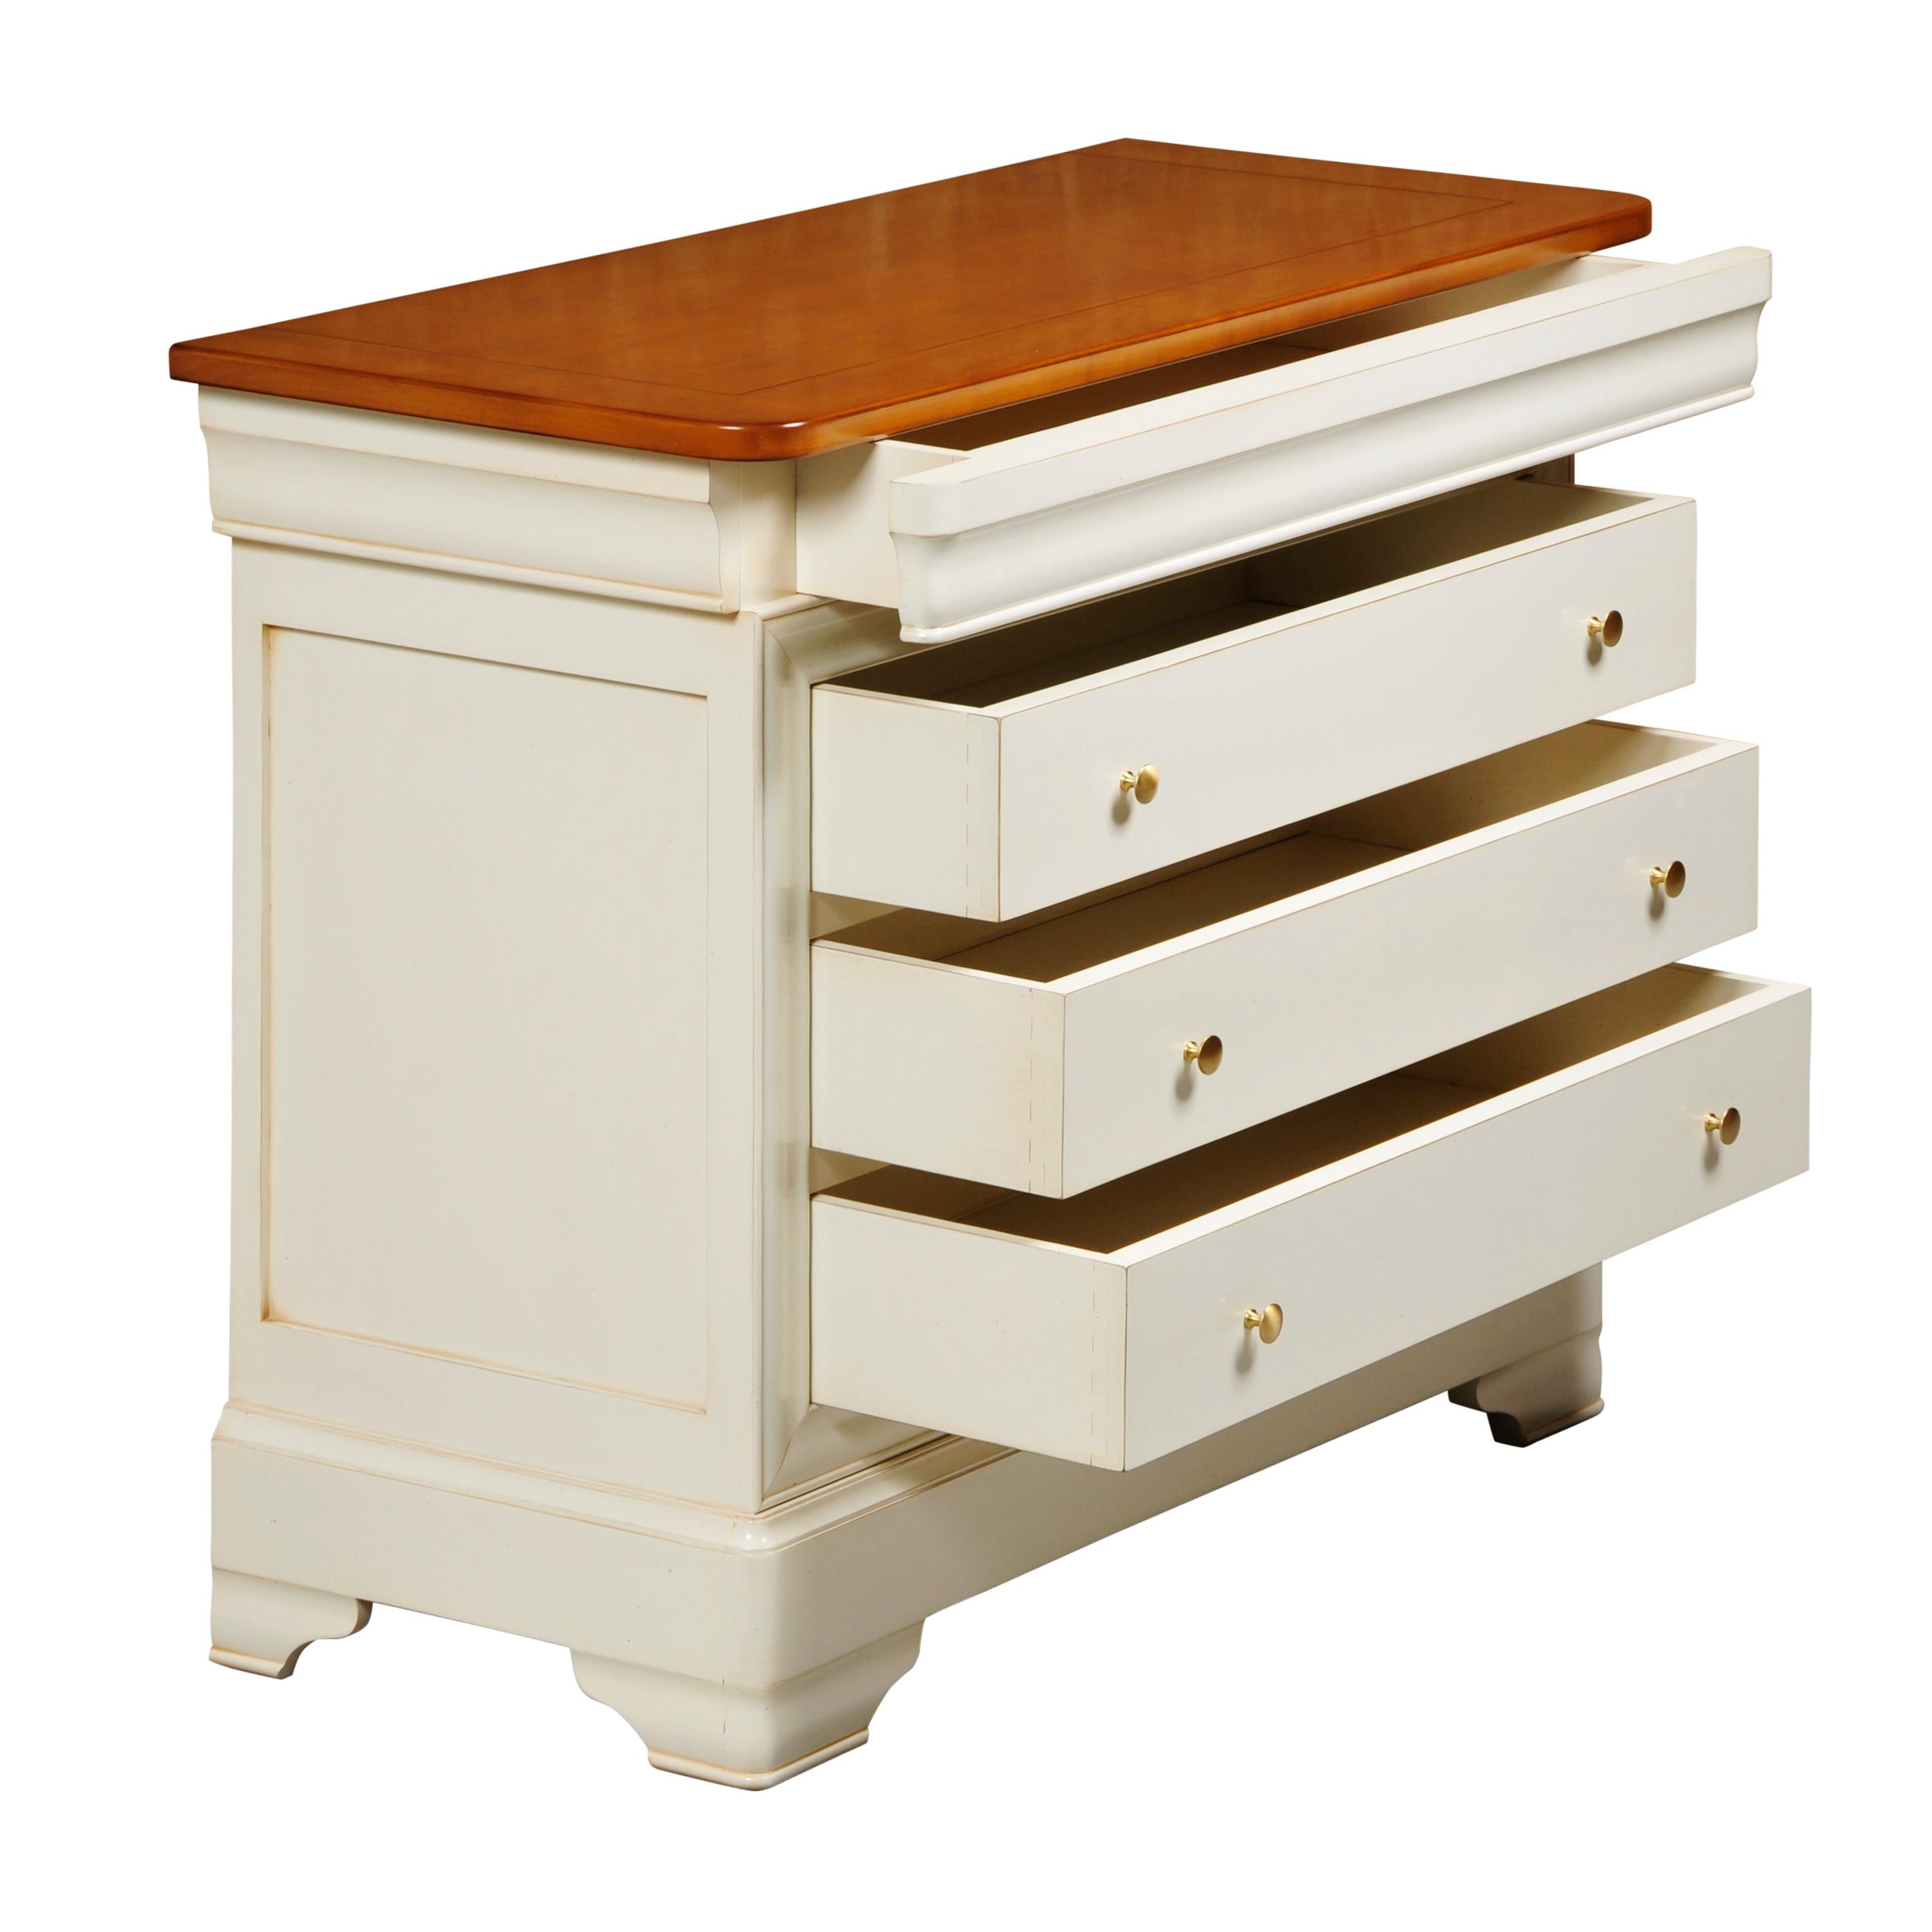 This chest of drawers is a handmade reproduction of the French Louis Philippe Style in the mid 19th century in France caracterized by its curved moldings, hand-curved feet and rounded design.

This French Commode features 4 drawers including a